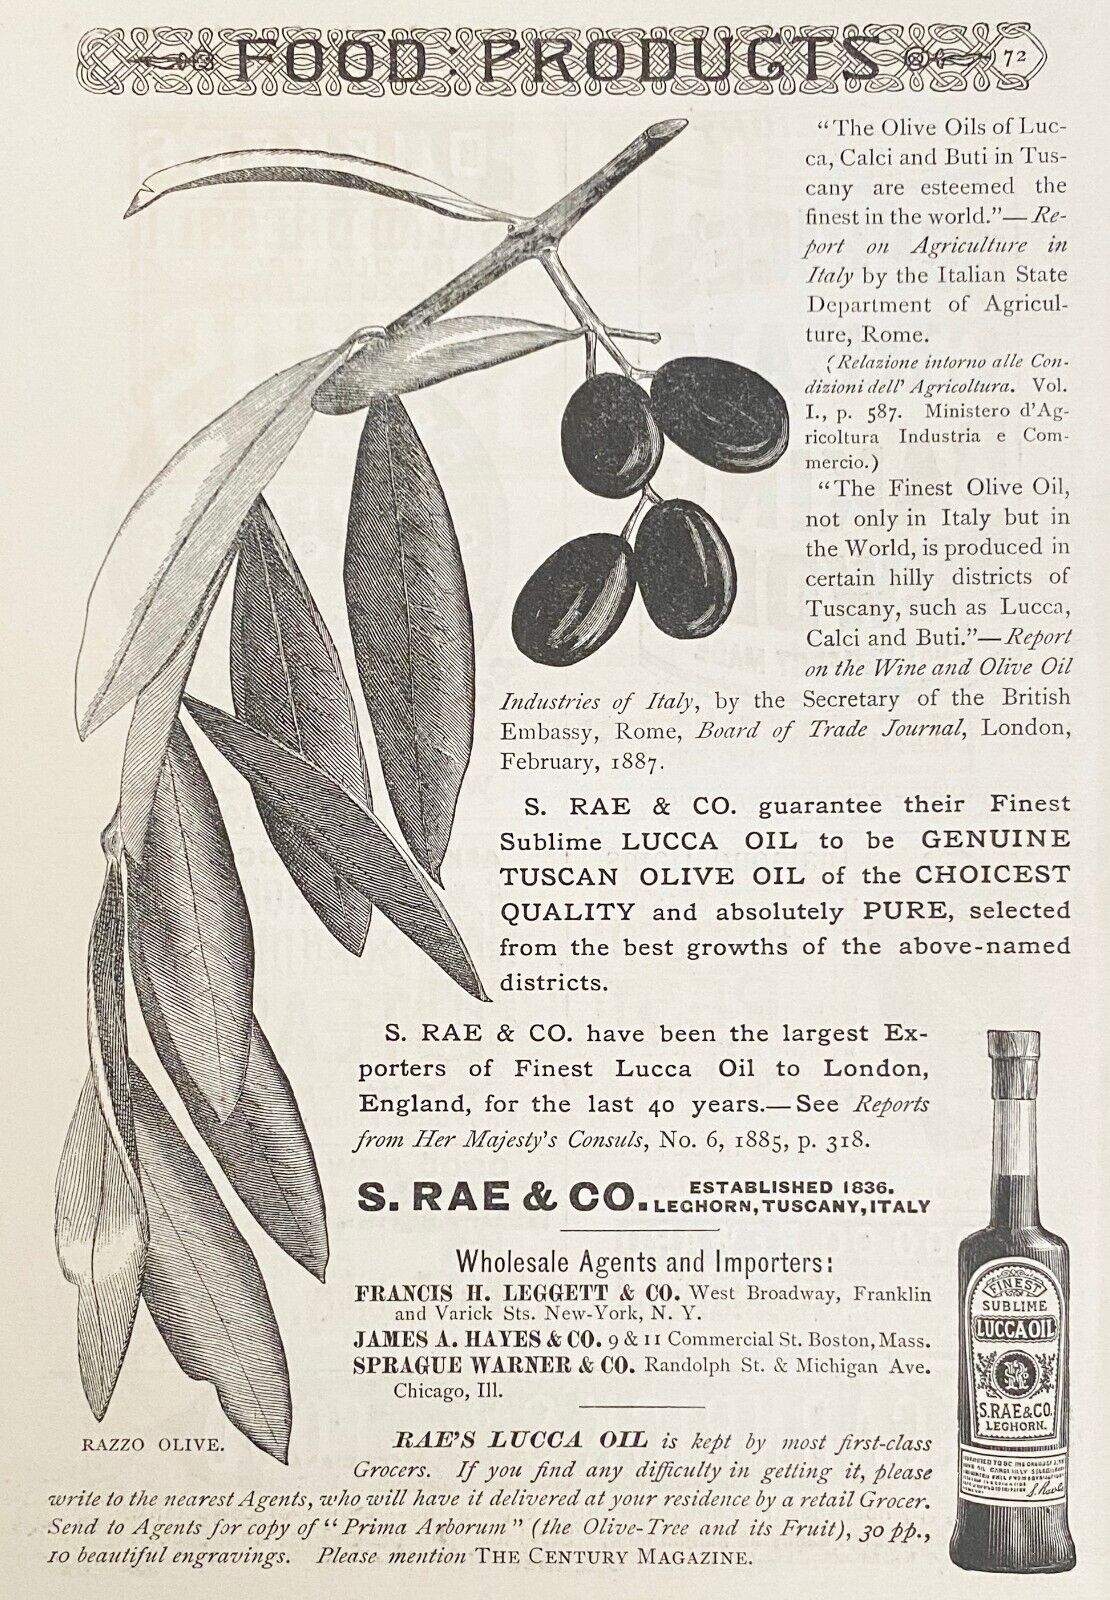 Antique 1888 Print Ad~FINE SUBLIME LUCCA OIL S.Rae&Co Tuscany Italy Olive Branch